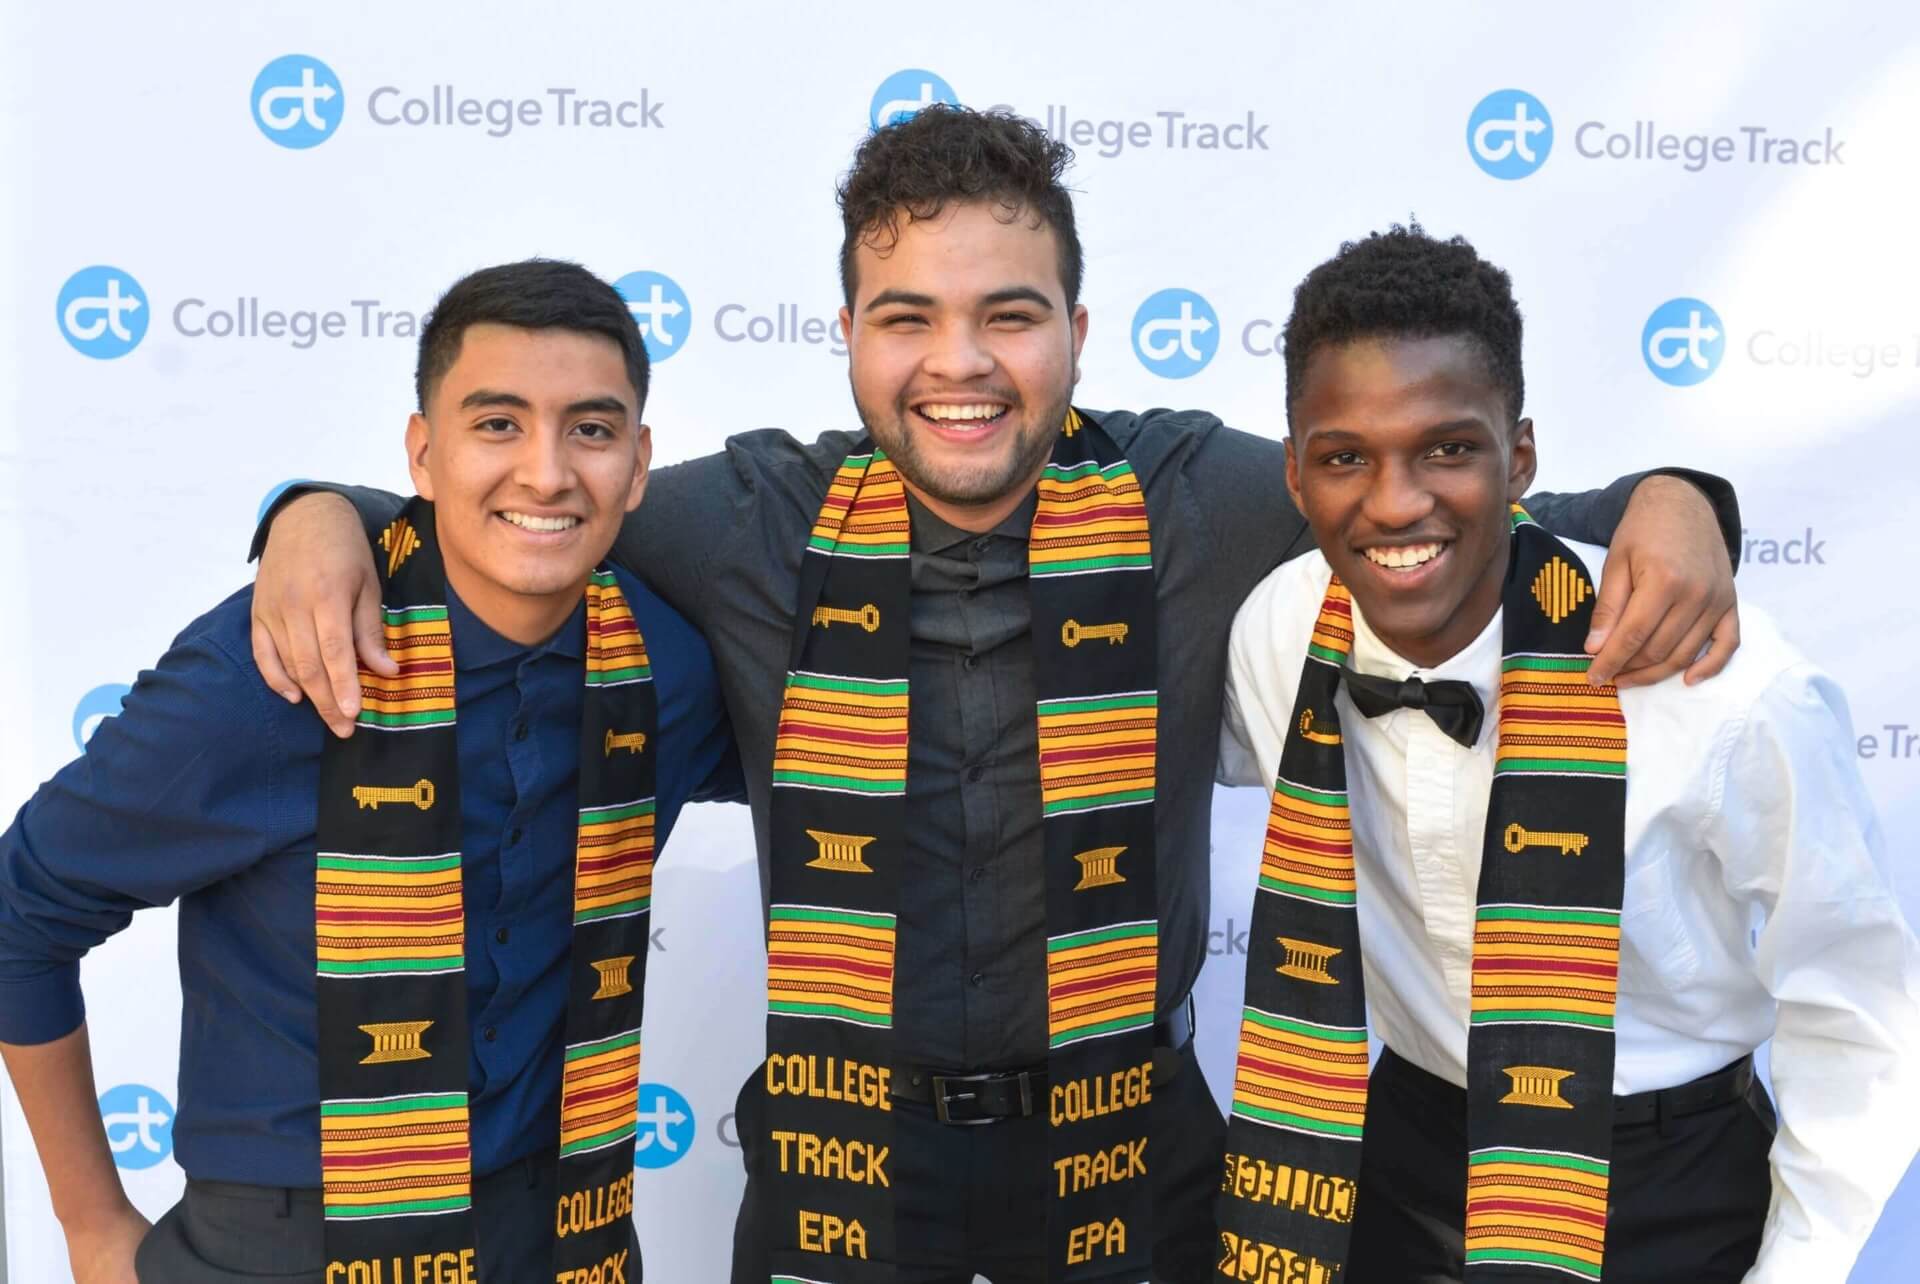 47College Track: Empowering students to shape bright futures